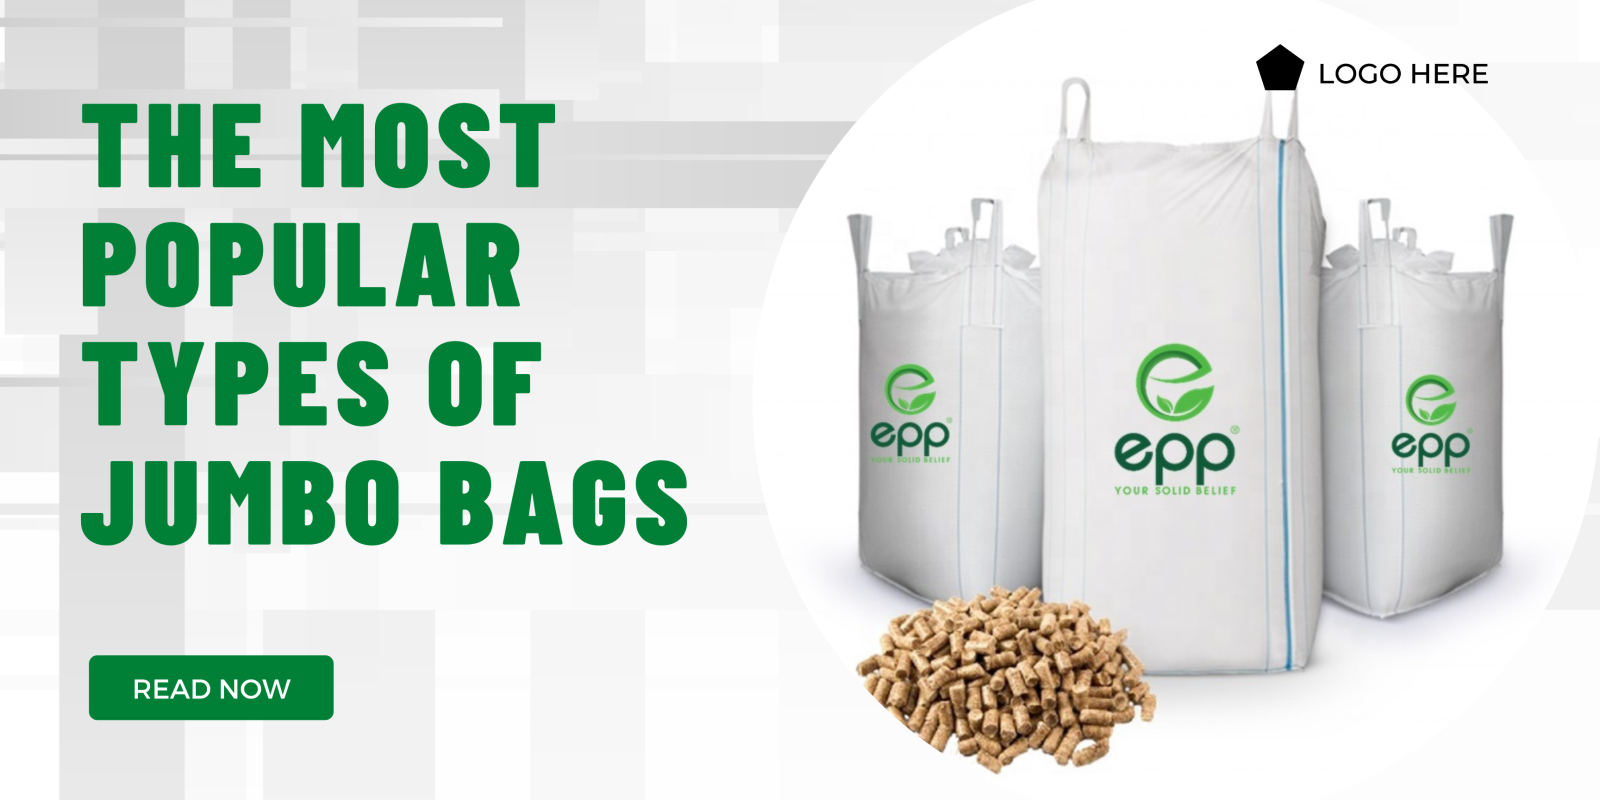 The-most-popular-types-of-jumbo-bags%20(1).png